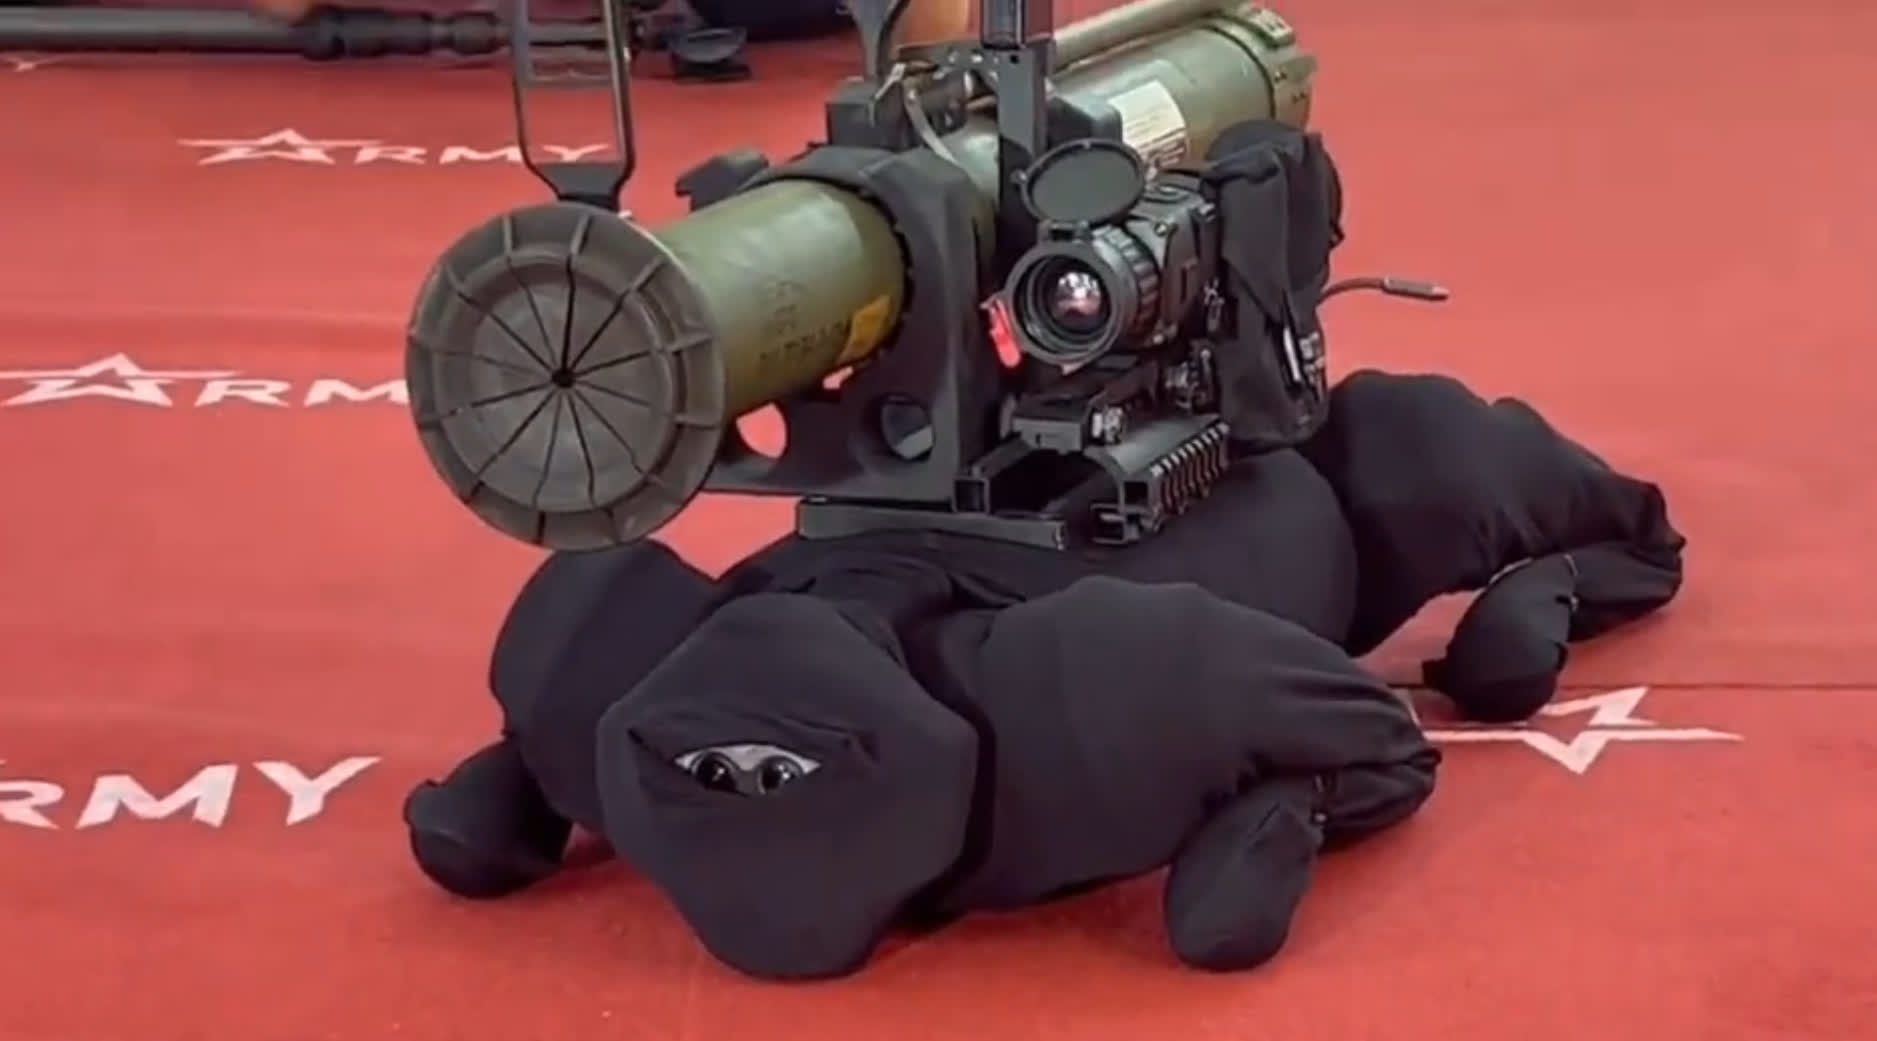 Russia's rocket launcher-carrying, robot ninja dog was likely bought off Alibaba